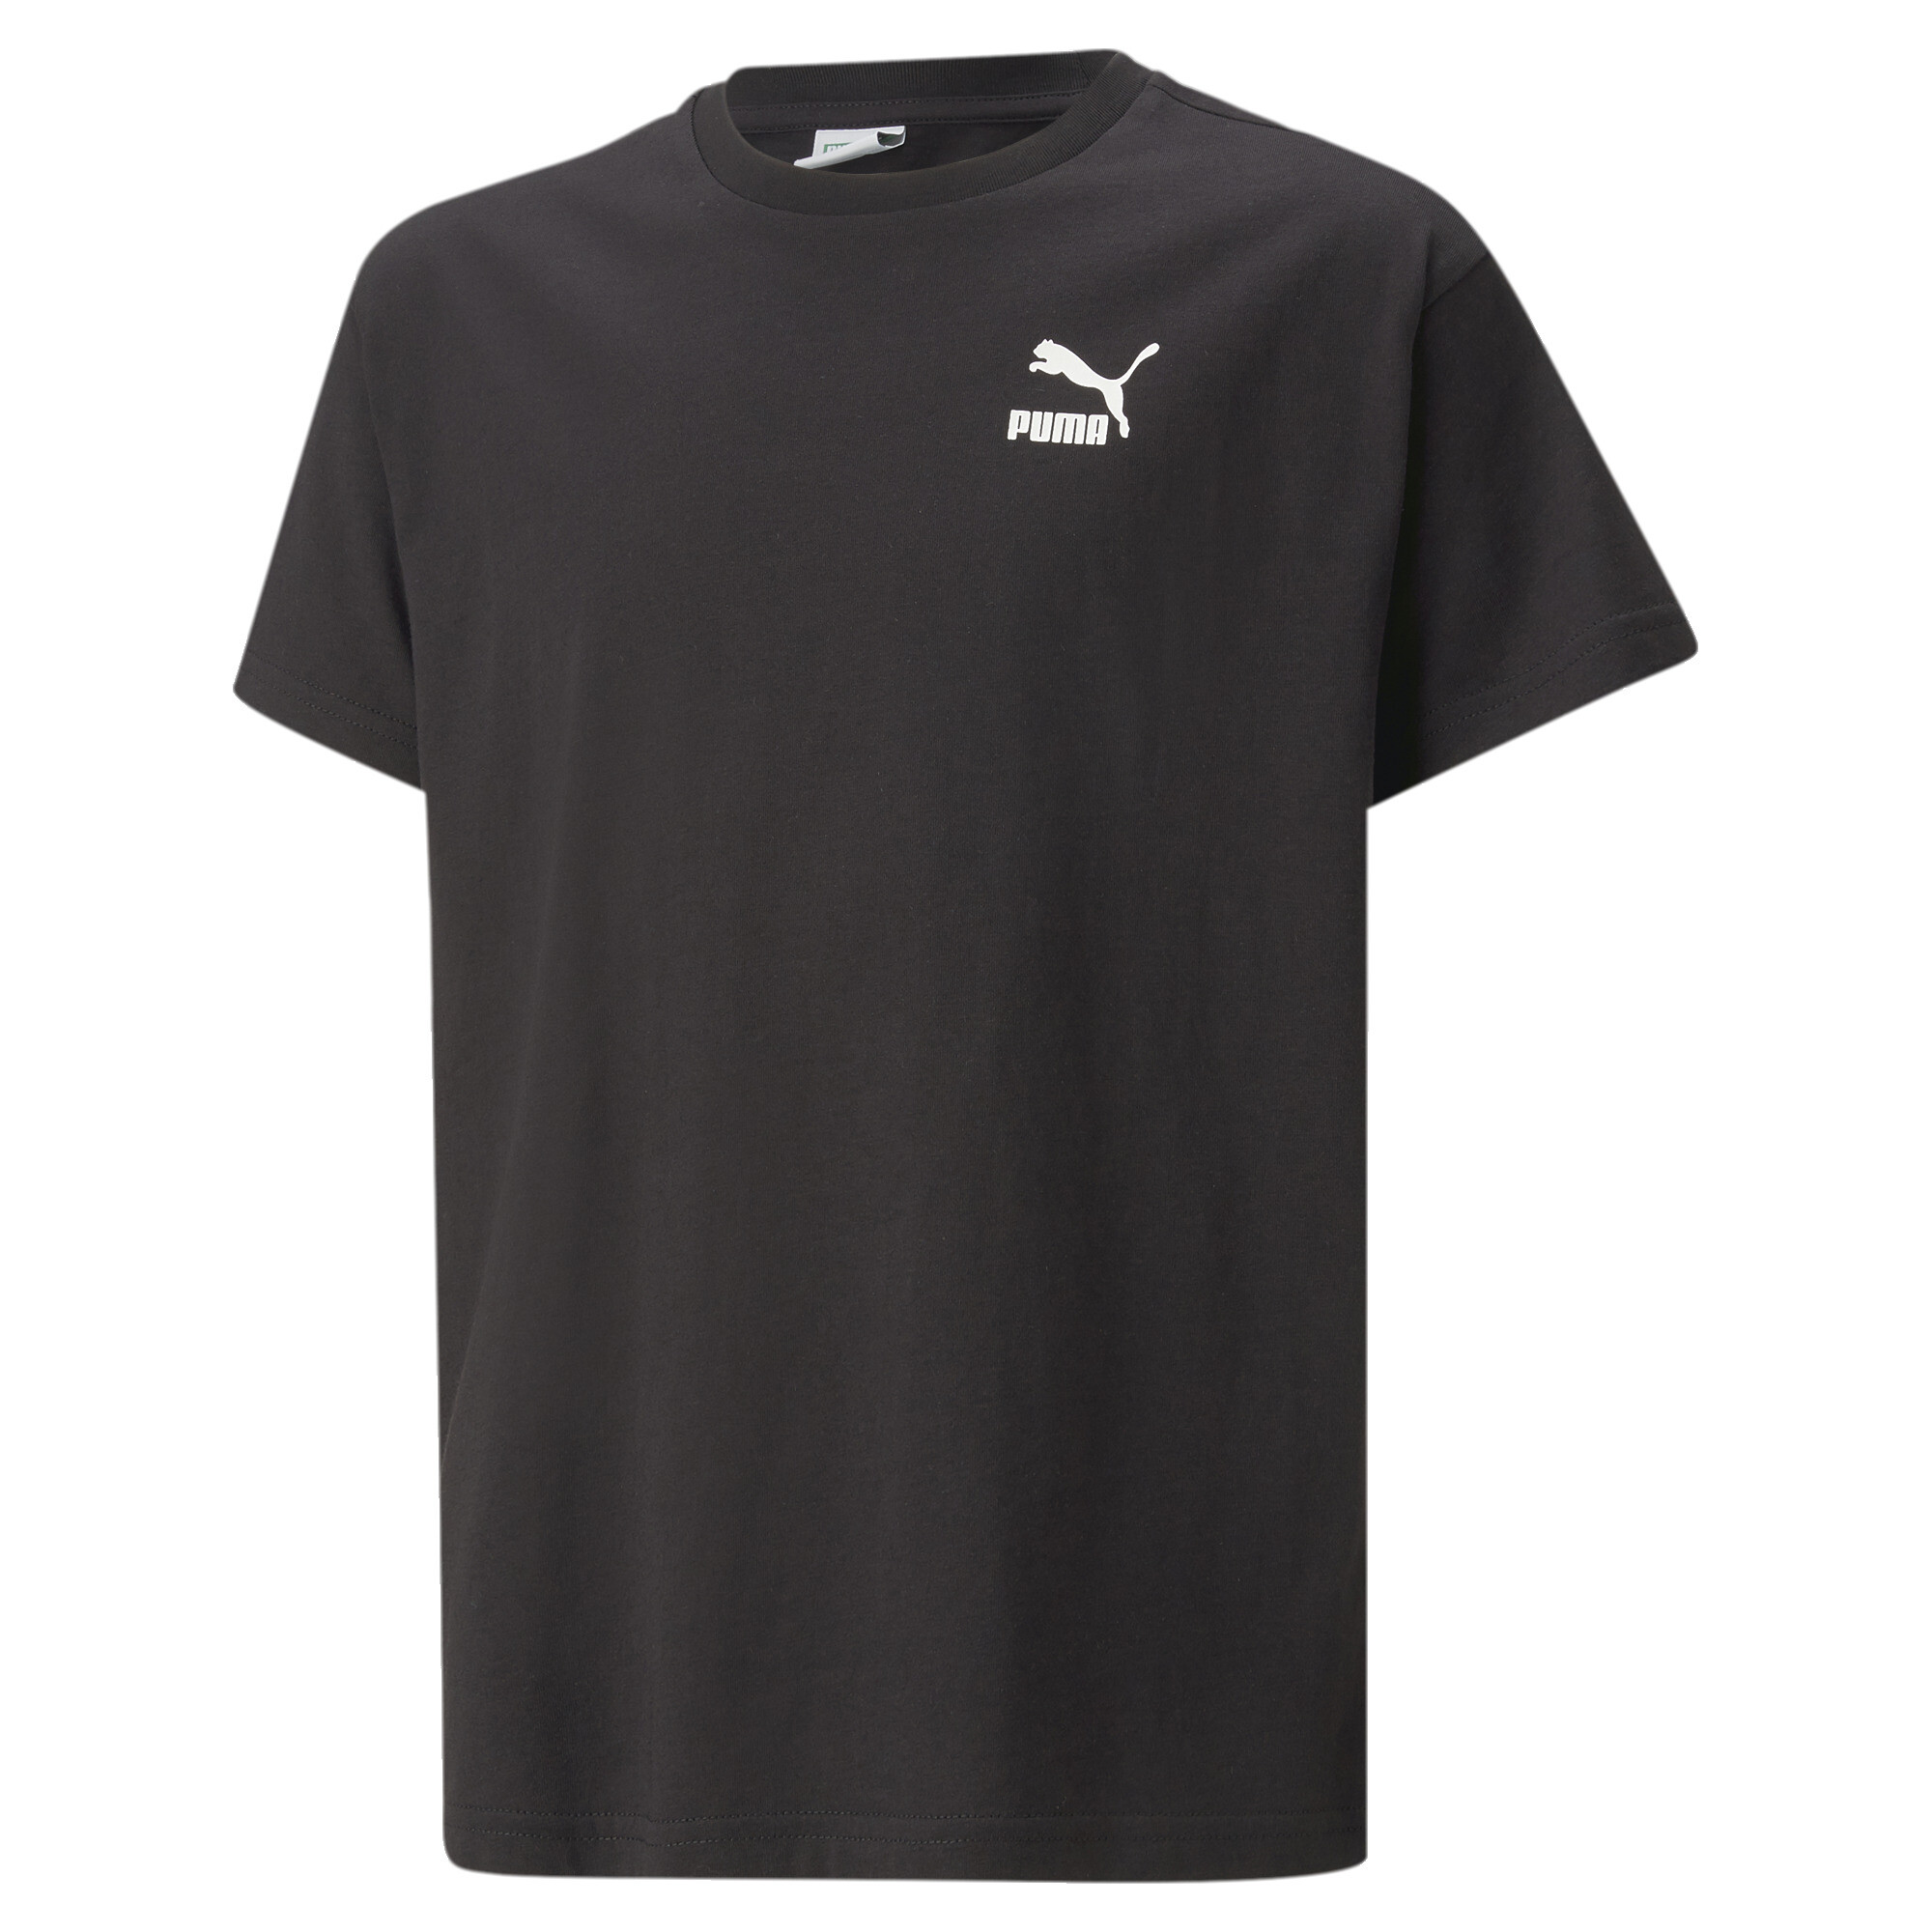 Puma Classics Relaxed Tee Youth, Black, Size 7-8Y, Age